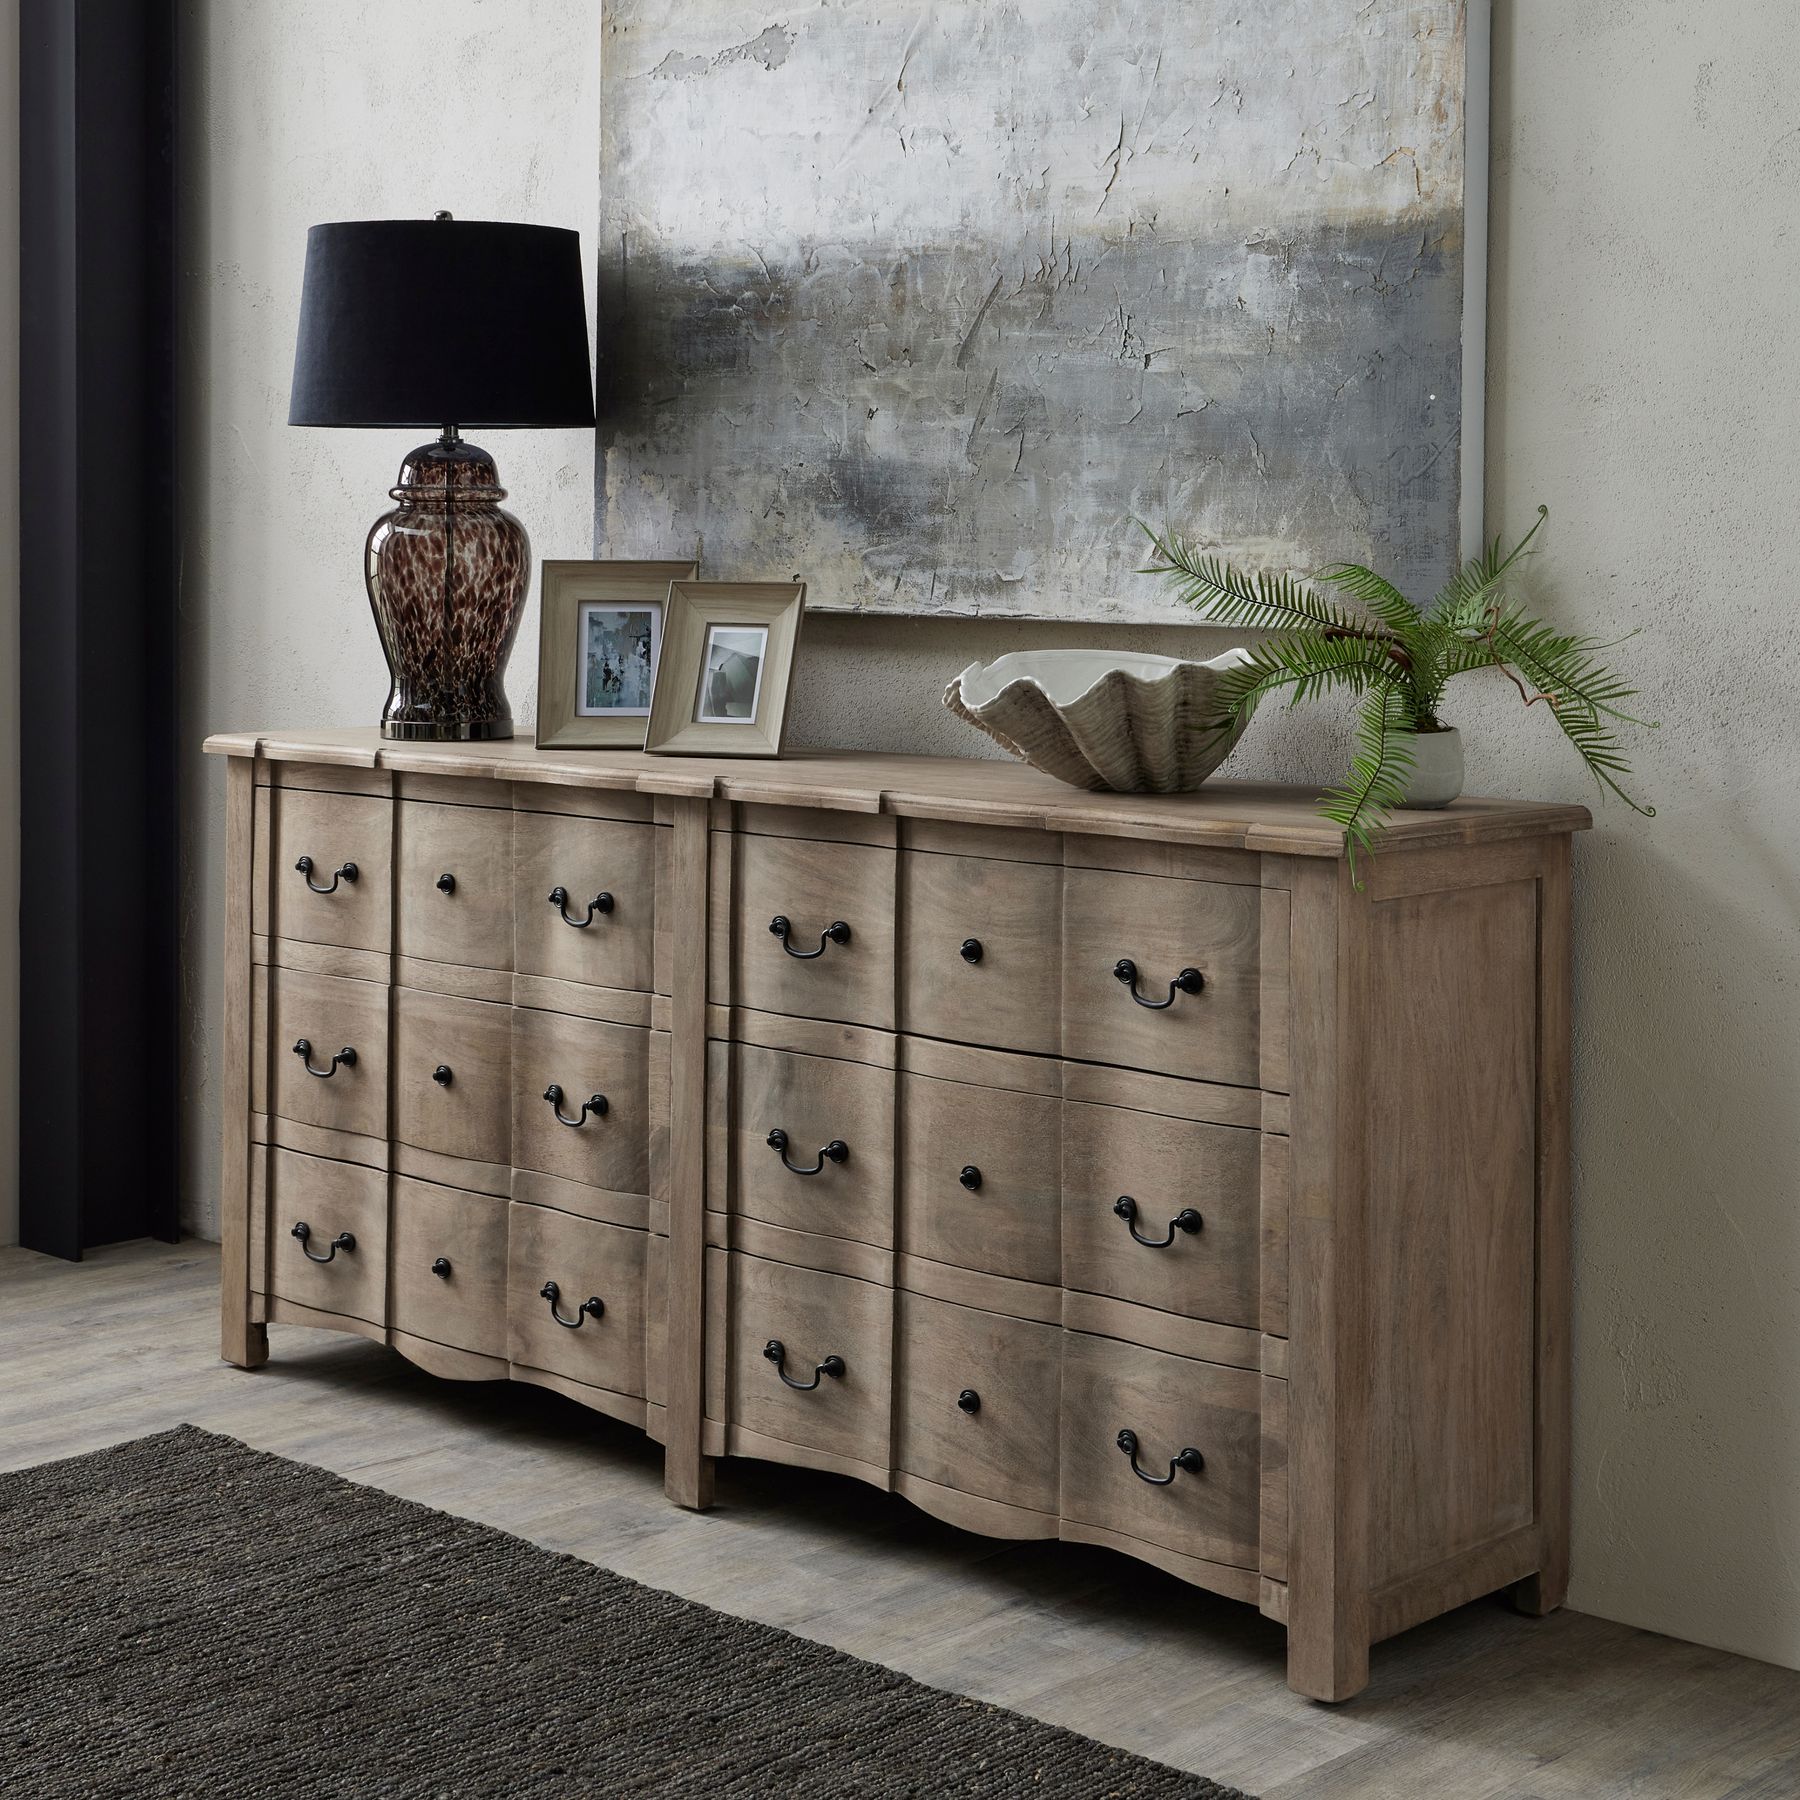 Copgrove Collection 6 Drawer Chest - Image 5